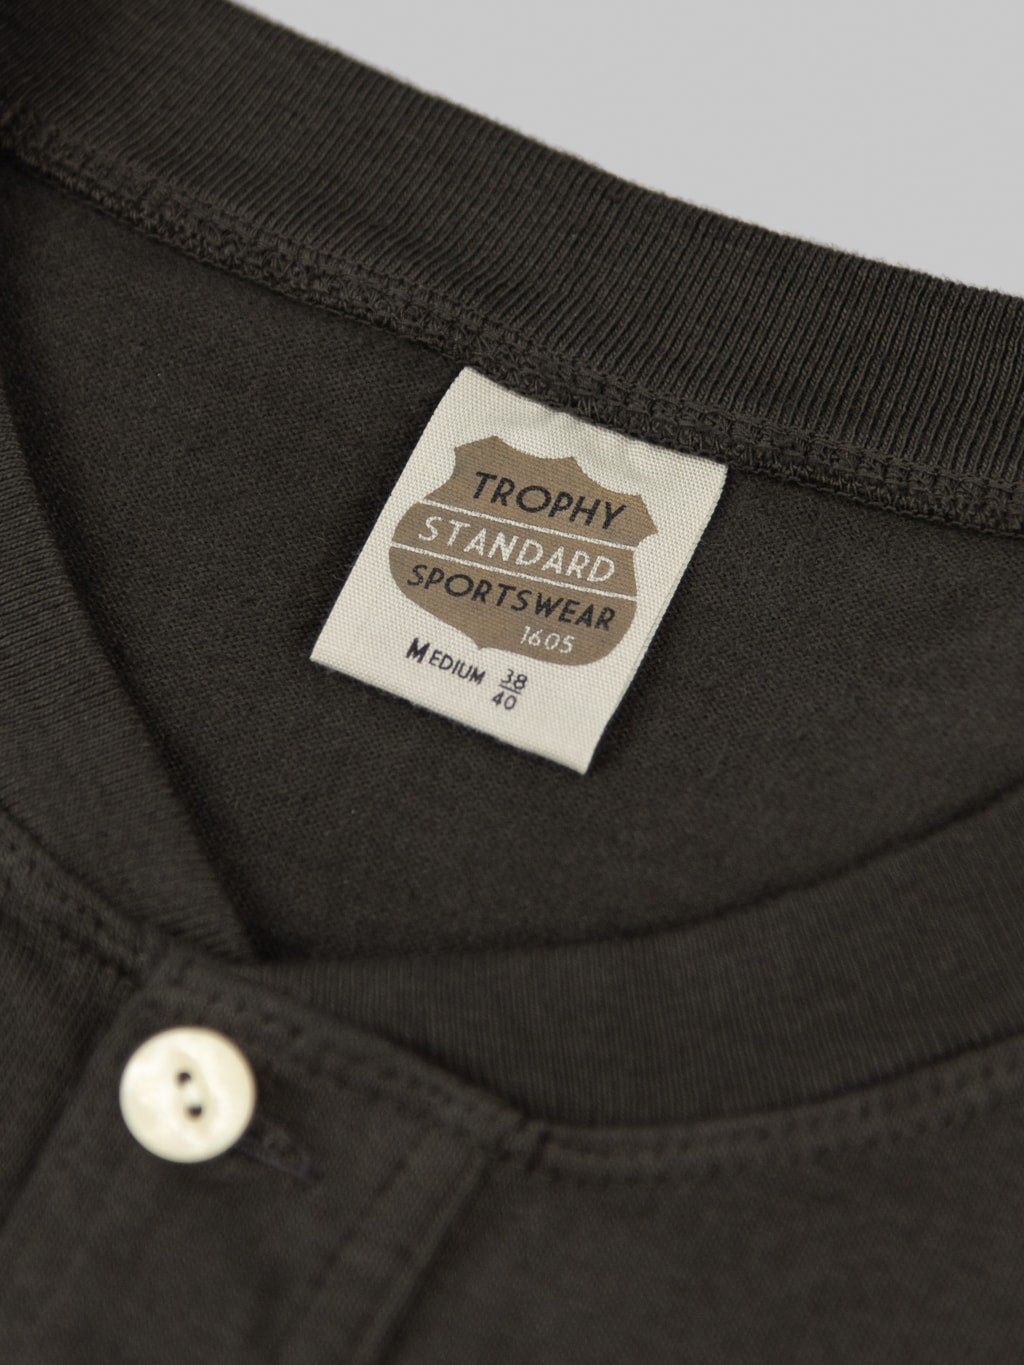 trophy clothing od henley tee black interior tag